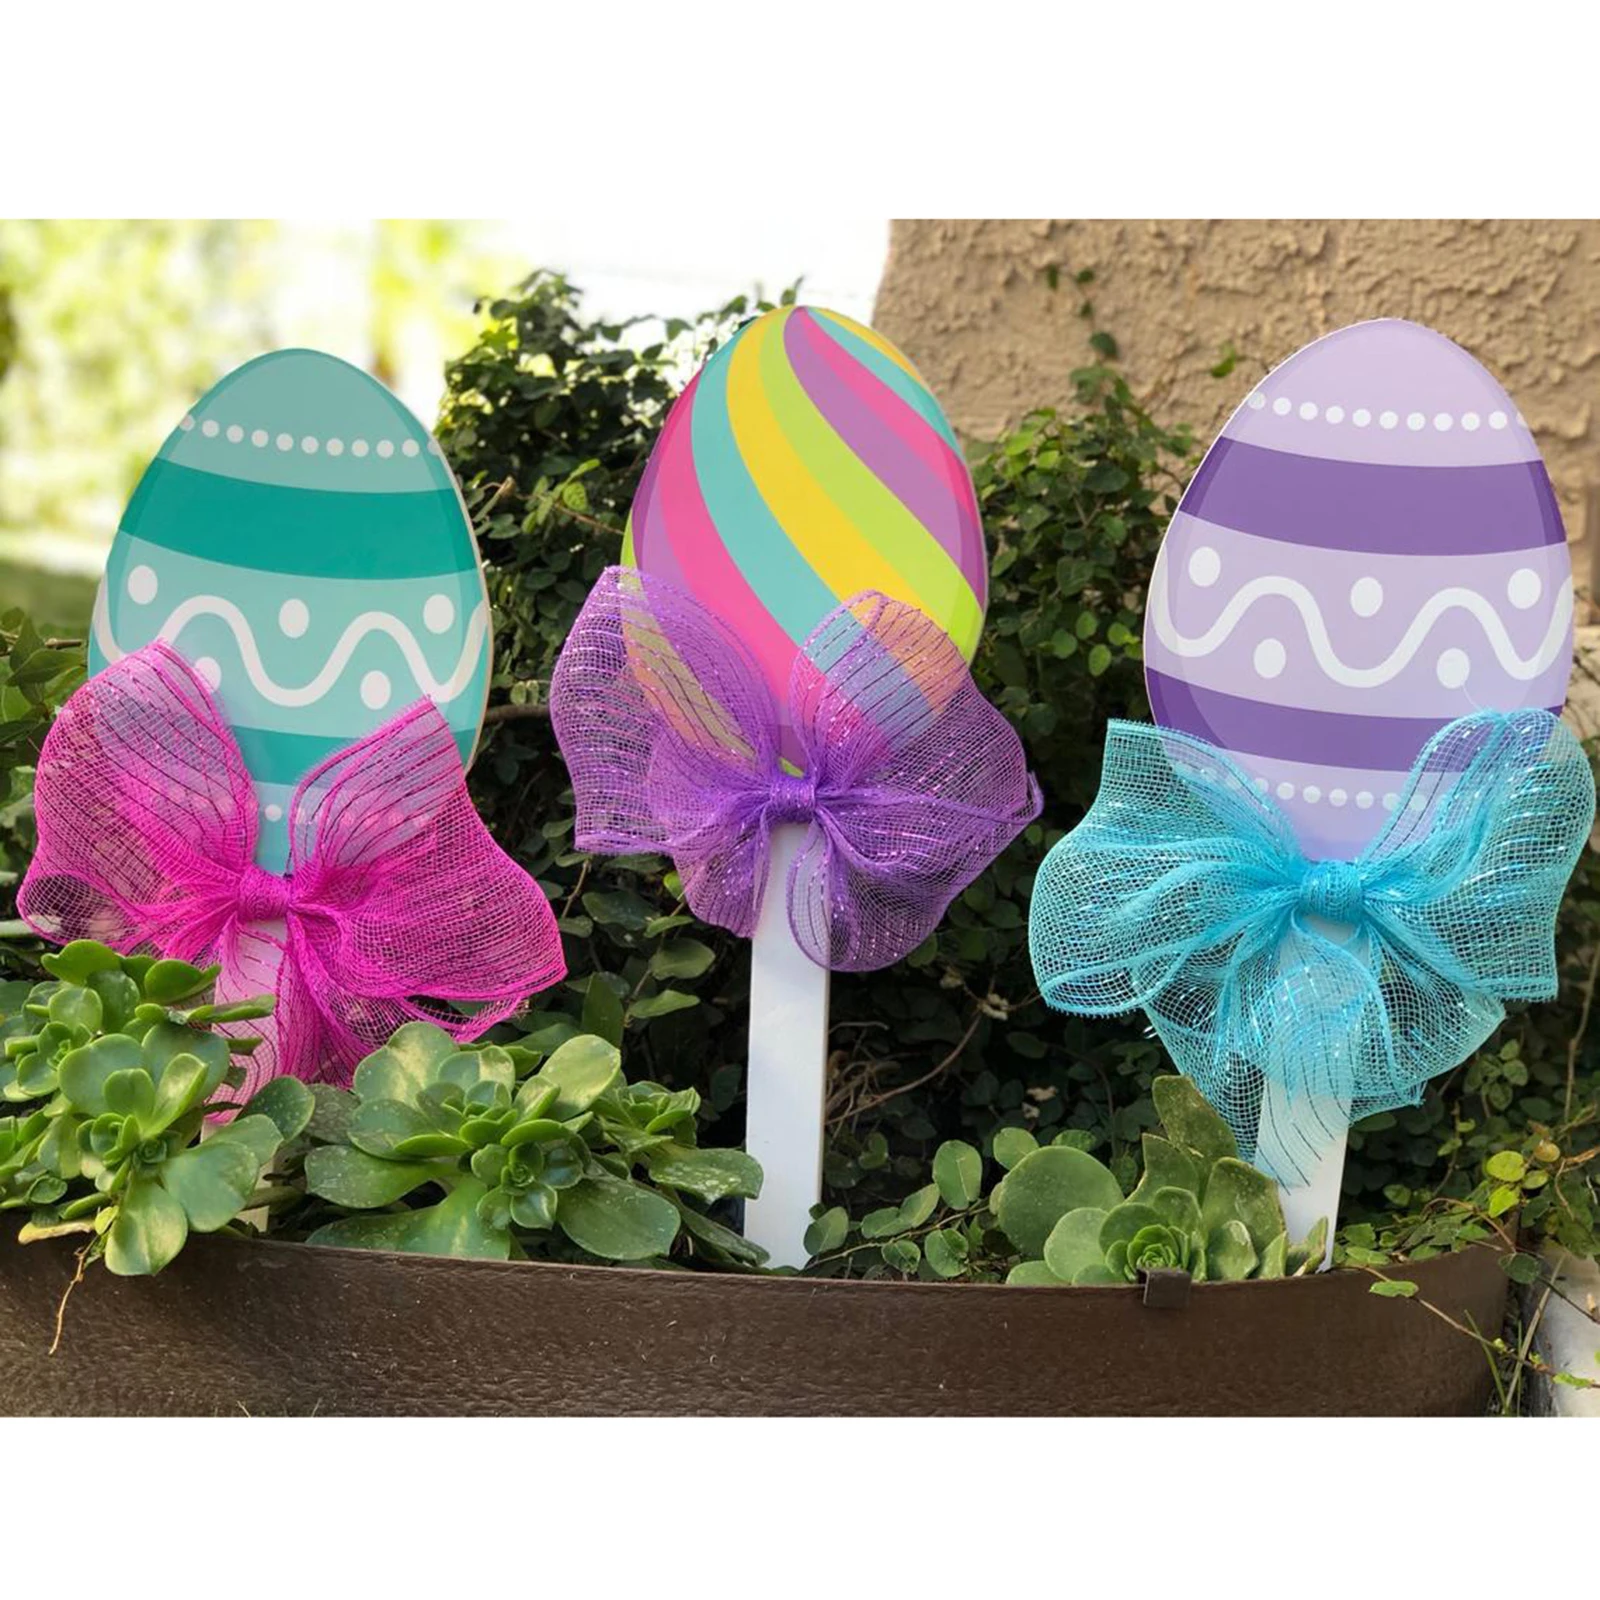 

Easter Eggs Holiday Garden Inserts Durable Decorative Stake Signs Cartoon Pattern Yard Decorations Foam Easy To Install